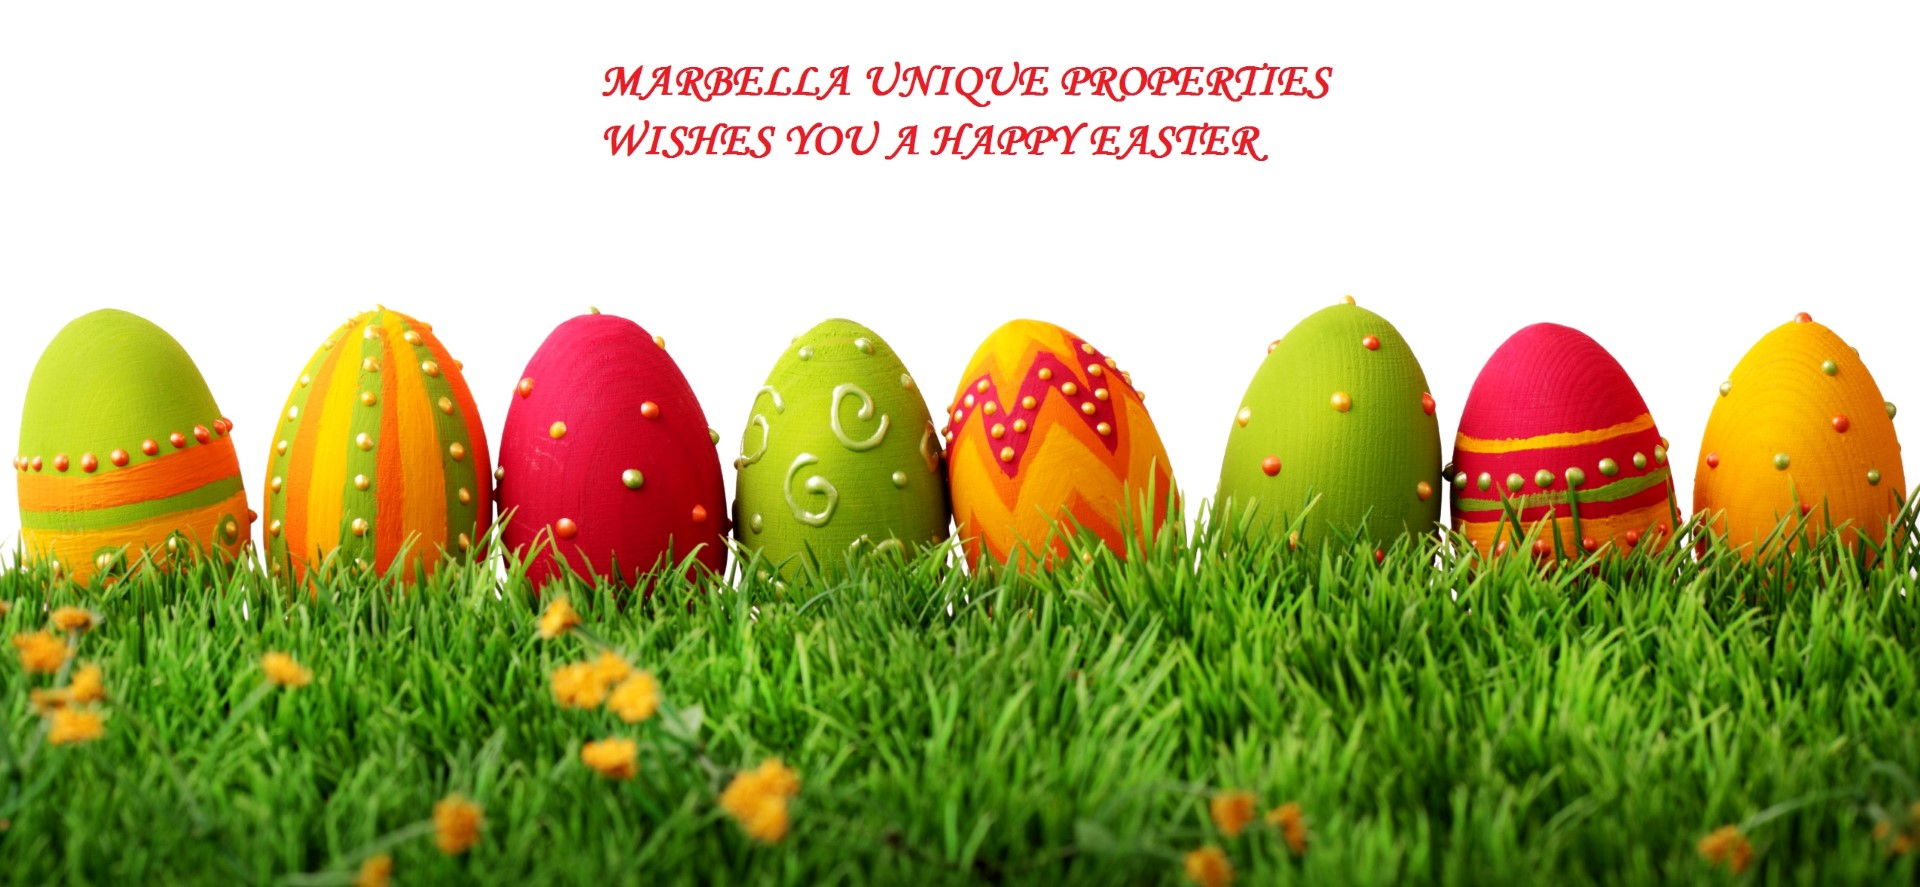 Looking to List Your Property in Marbella